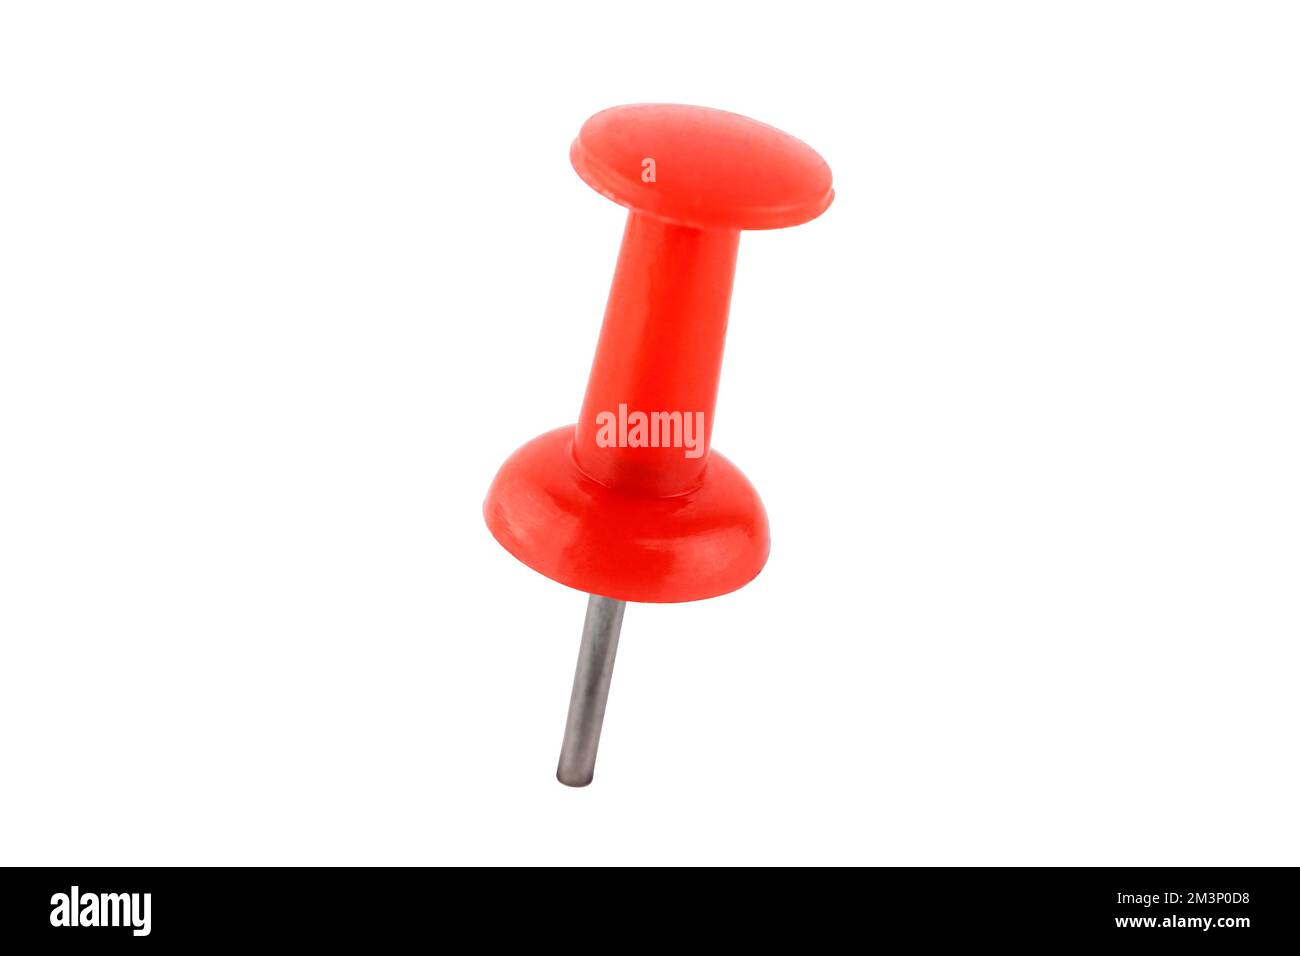 Red push pin isolated on white background Stock Photo